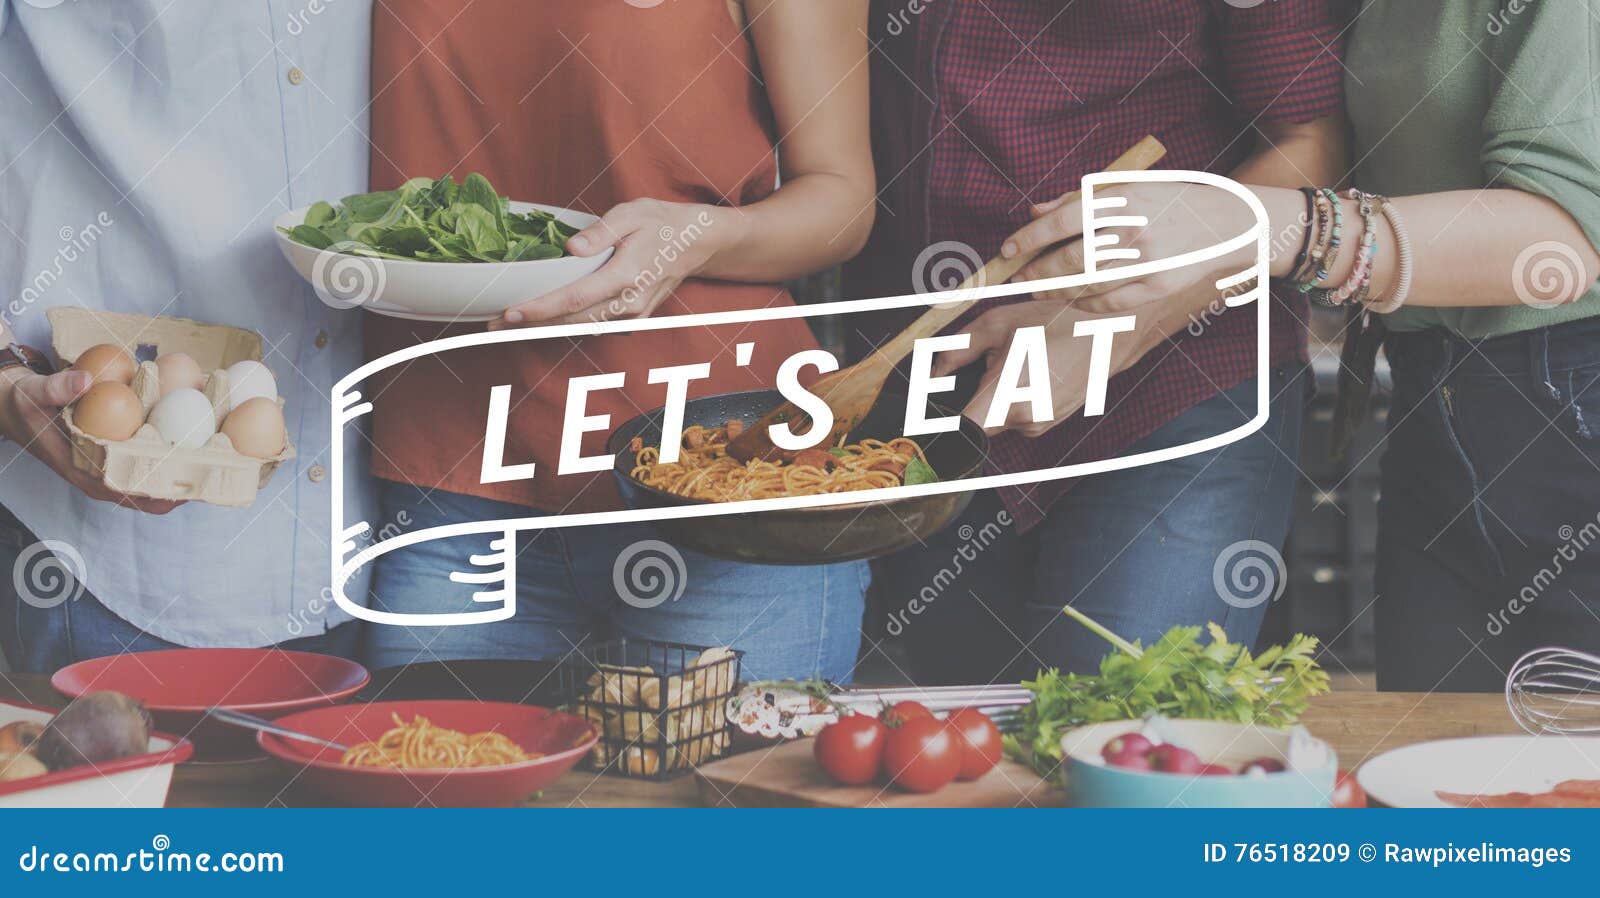 let's eat food eating delicious party celebration concept